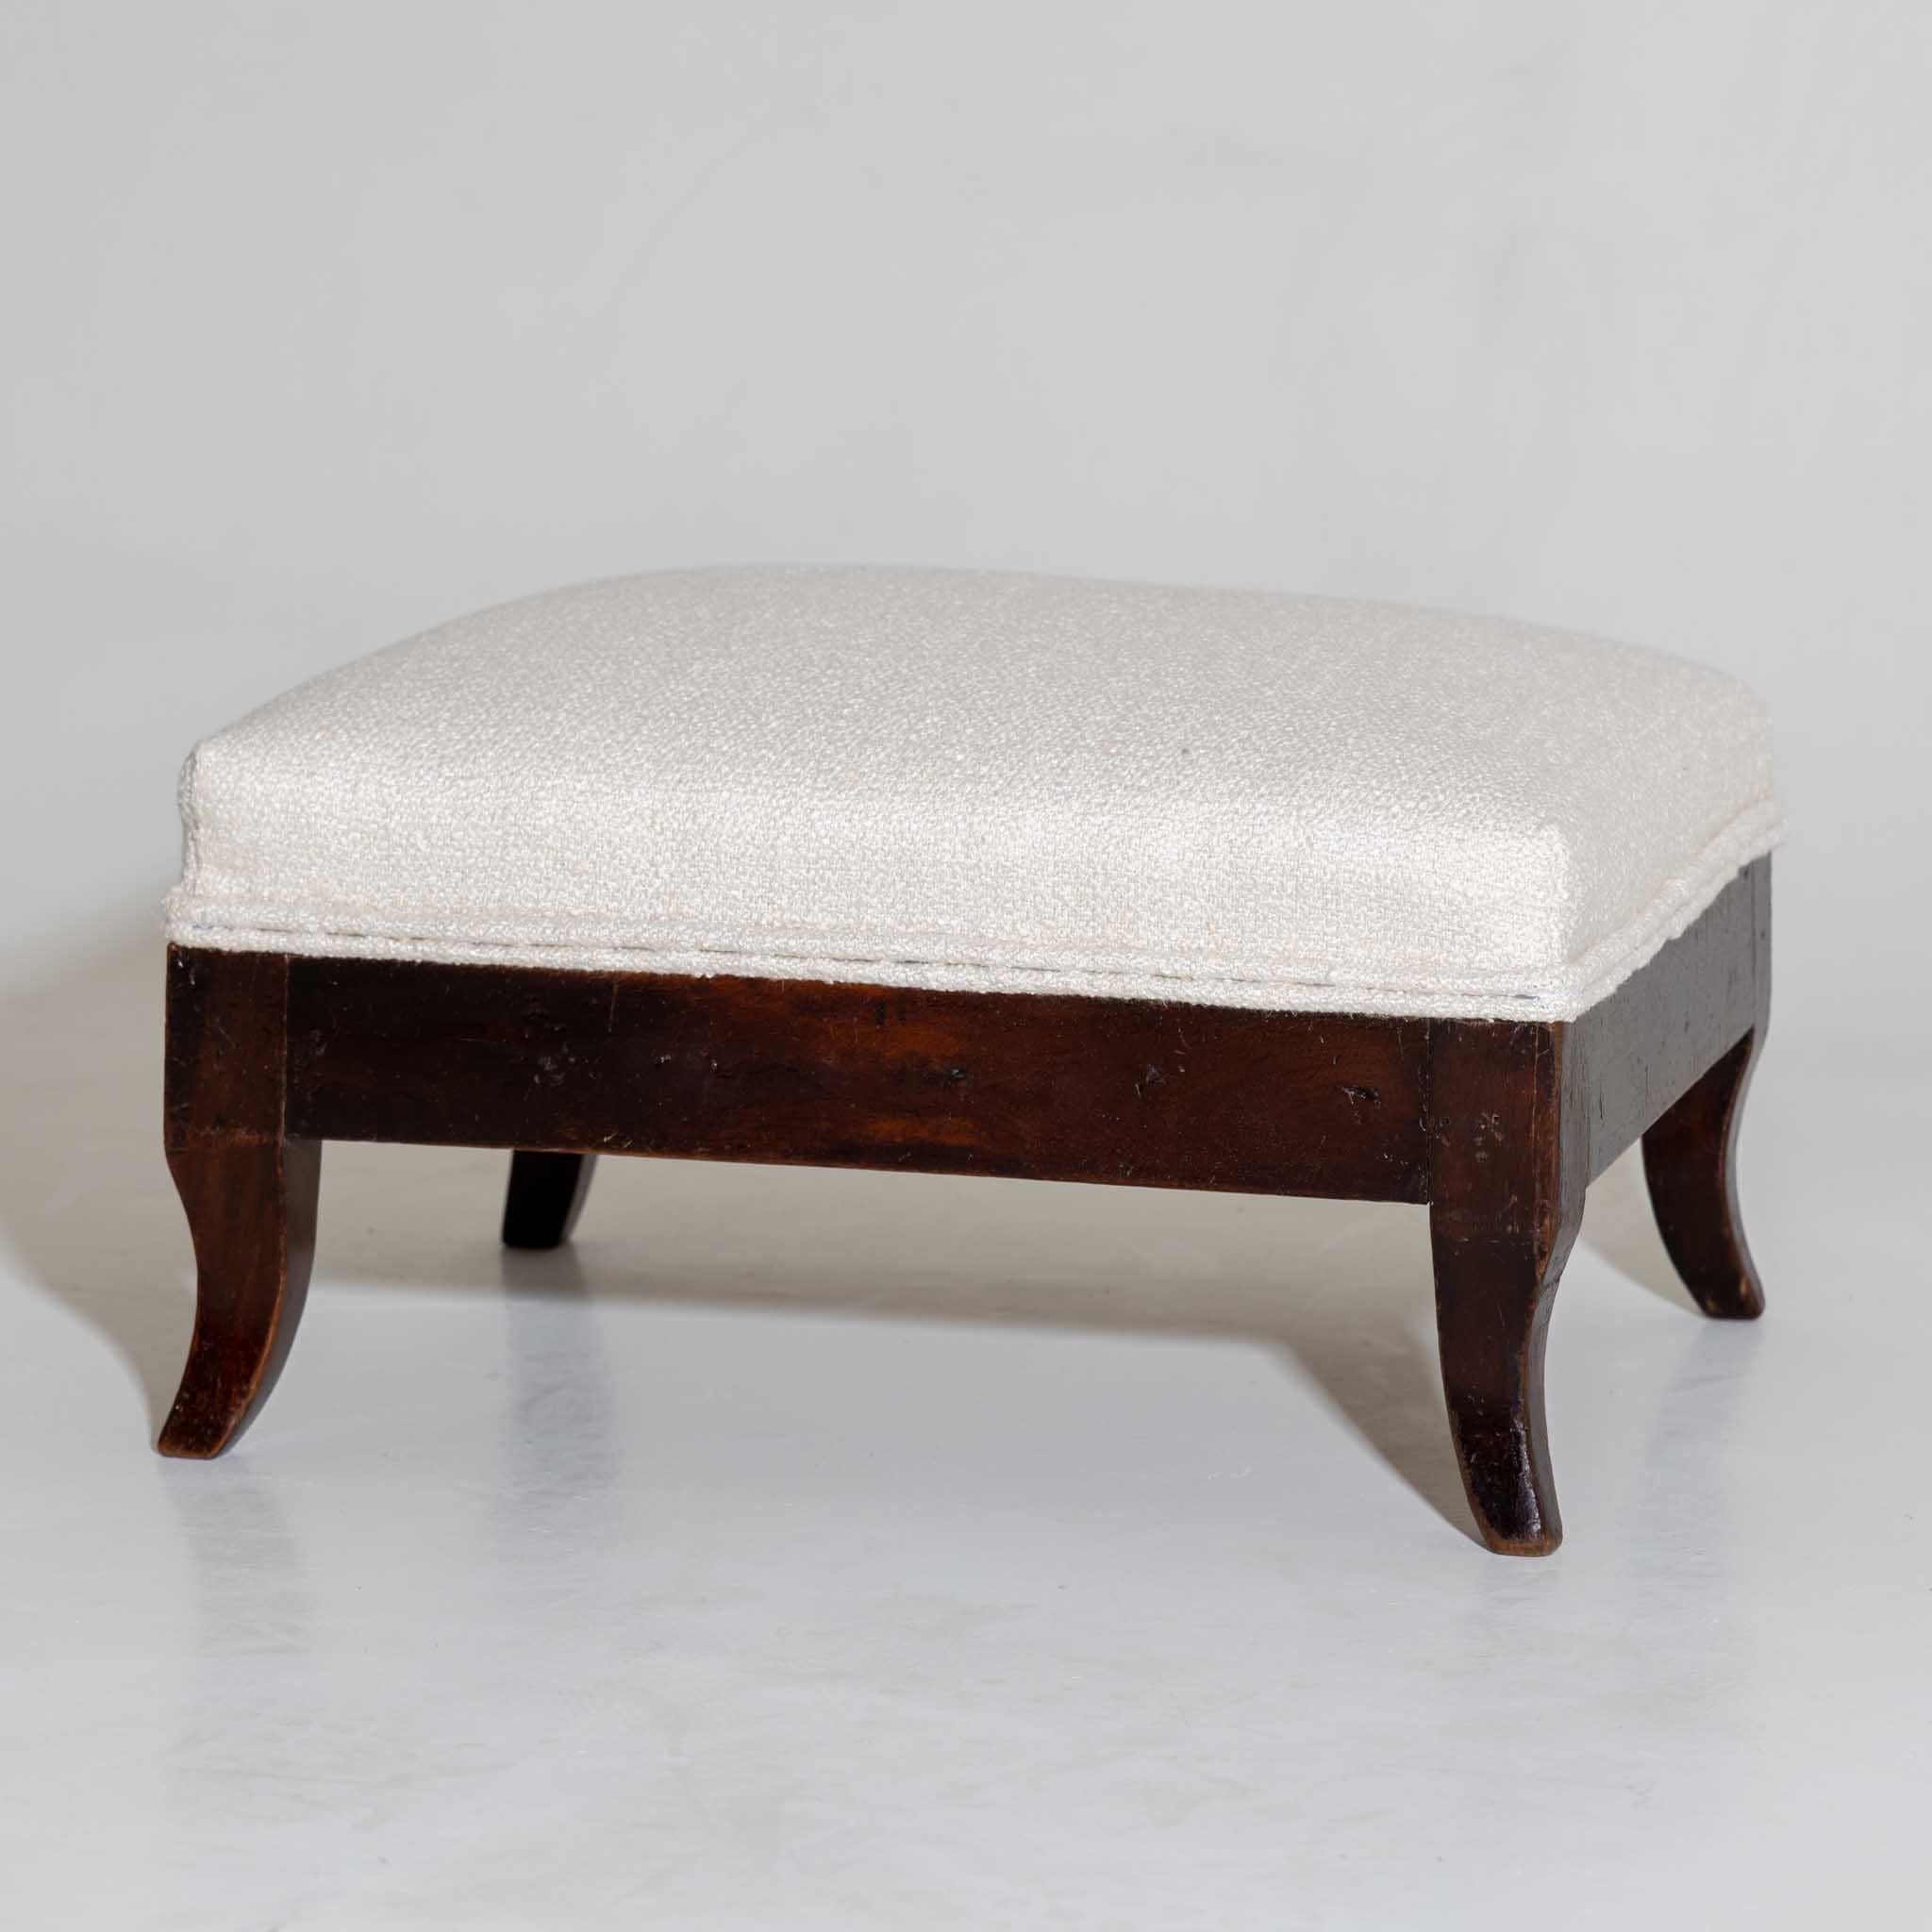 Small Footstool, 19th Century In Good Condition For Sale In Greding, DE